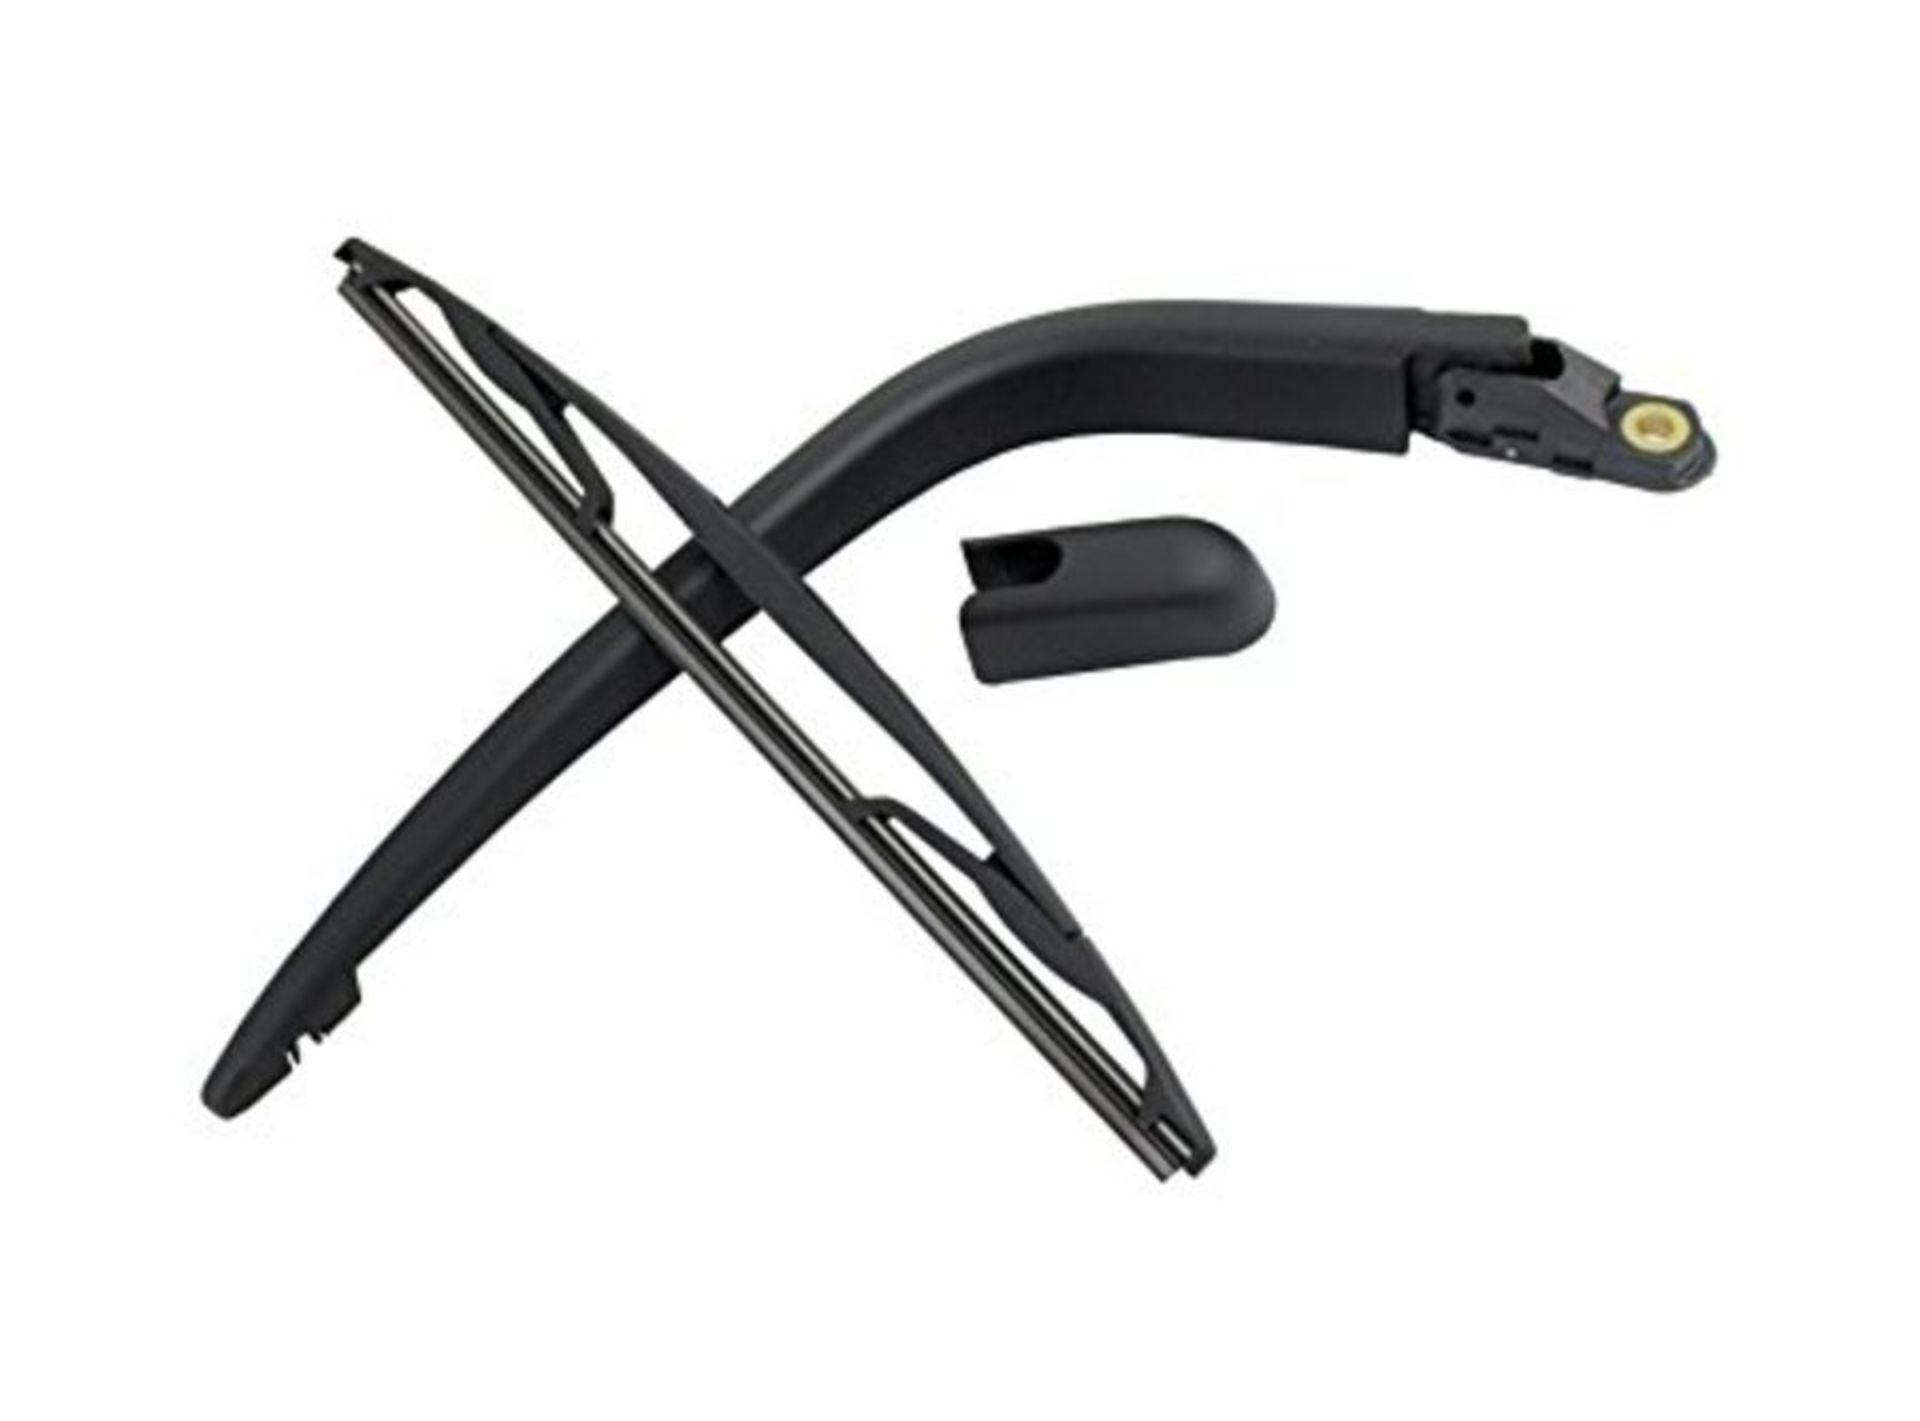 TarosTrade 244-0225-N-82514 Rear Wiper Arm And Blade Set 305 Mm For Cars Made In Franc